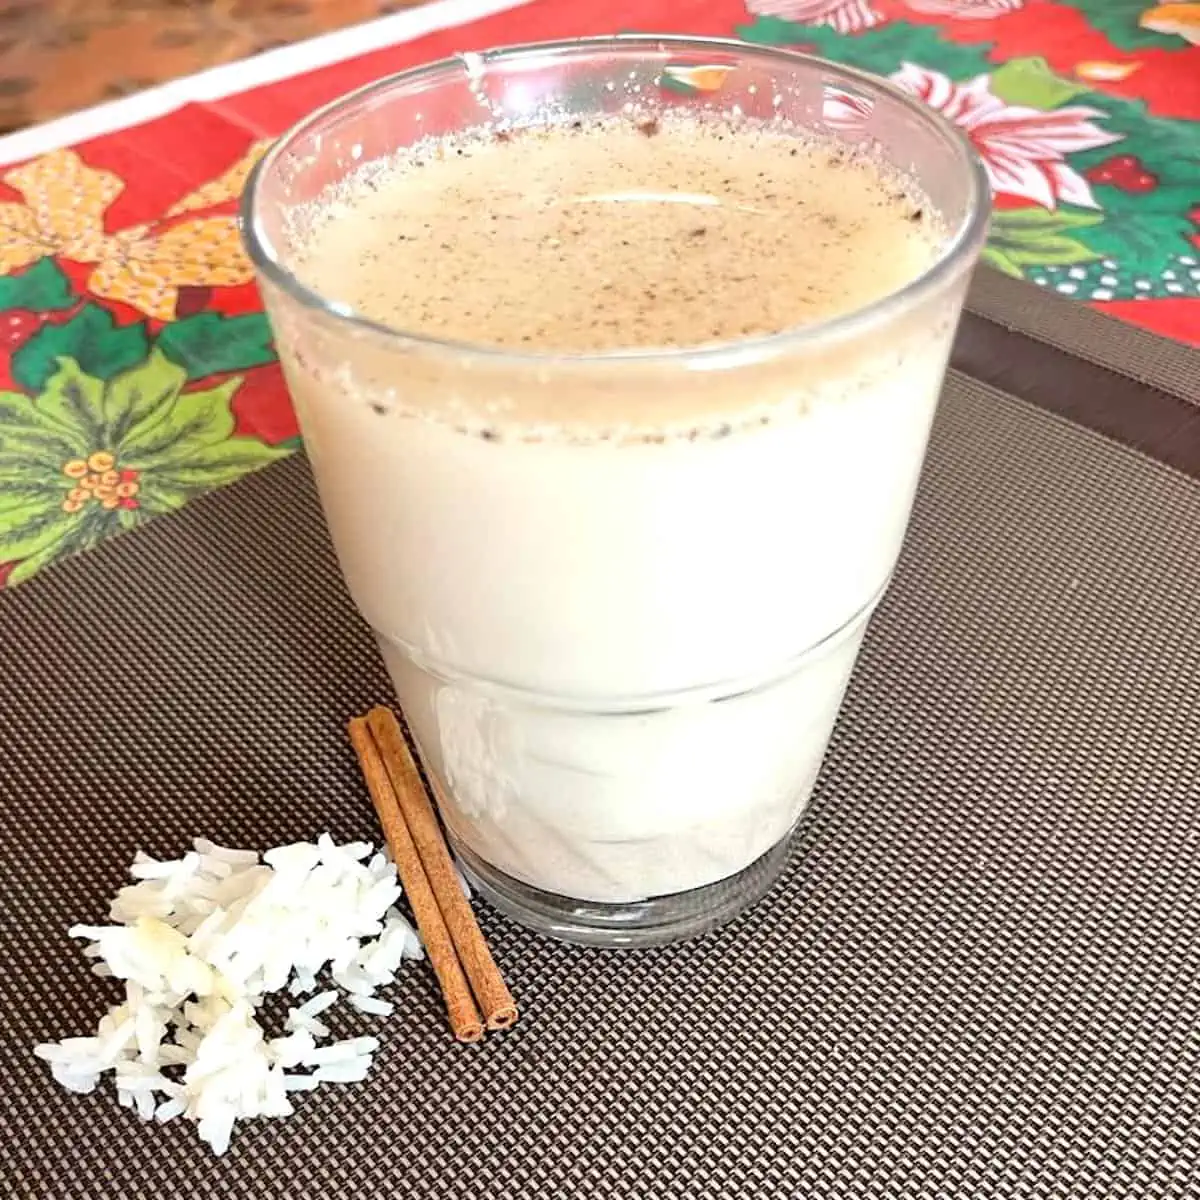 Horchata served with a cinnamon stick on a brown tablecloth.